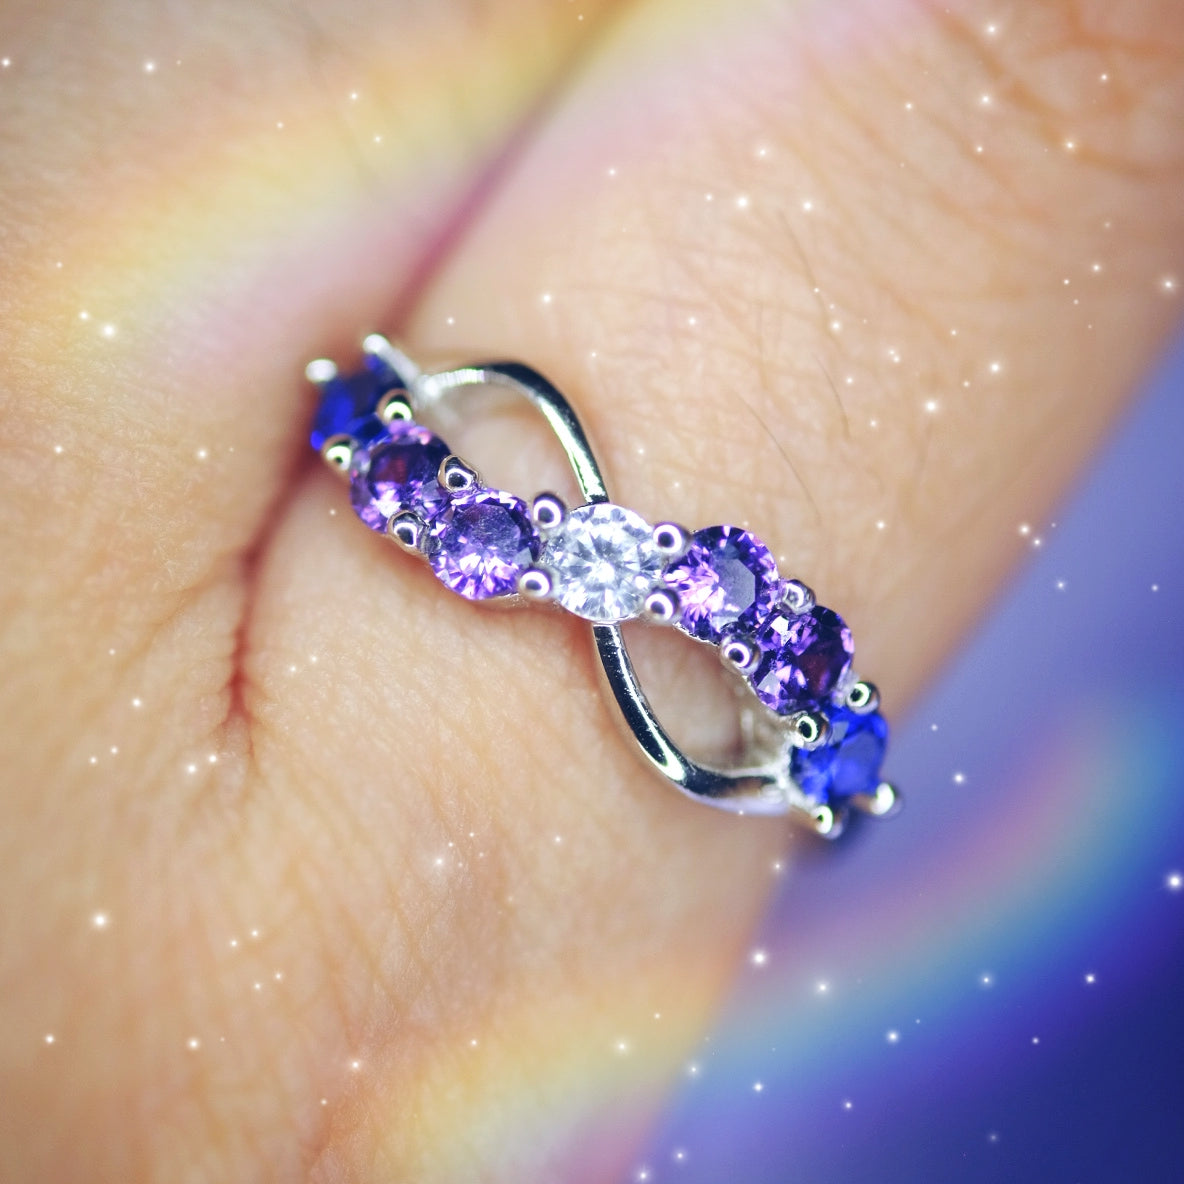 Twinflame 1111 Ring - Wonderland L'atelier